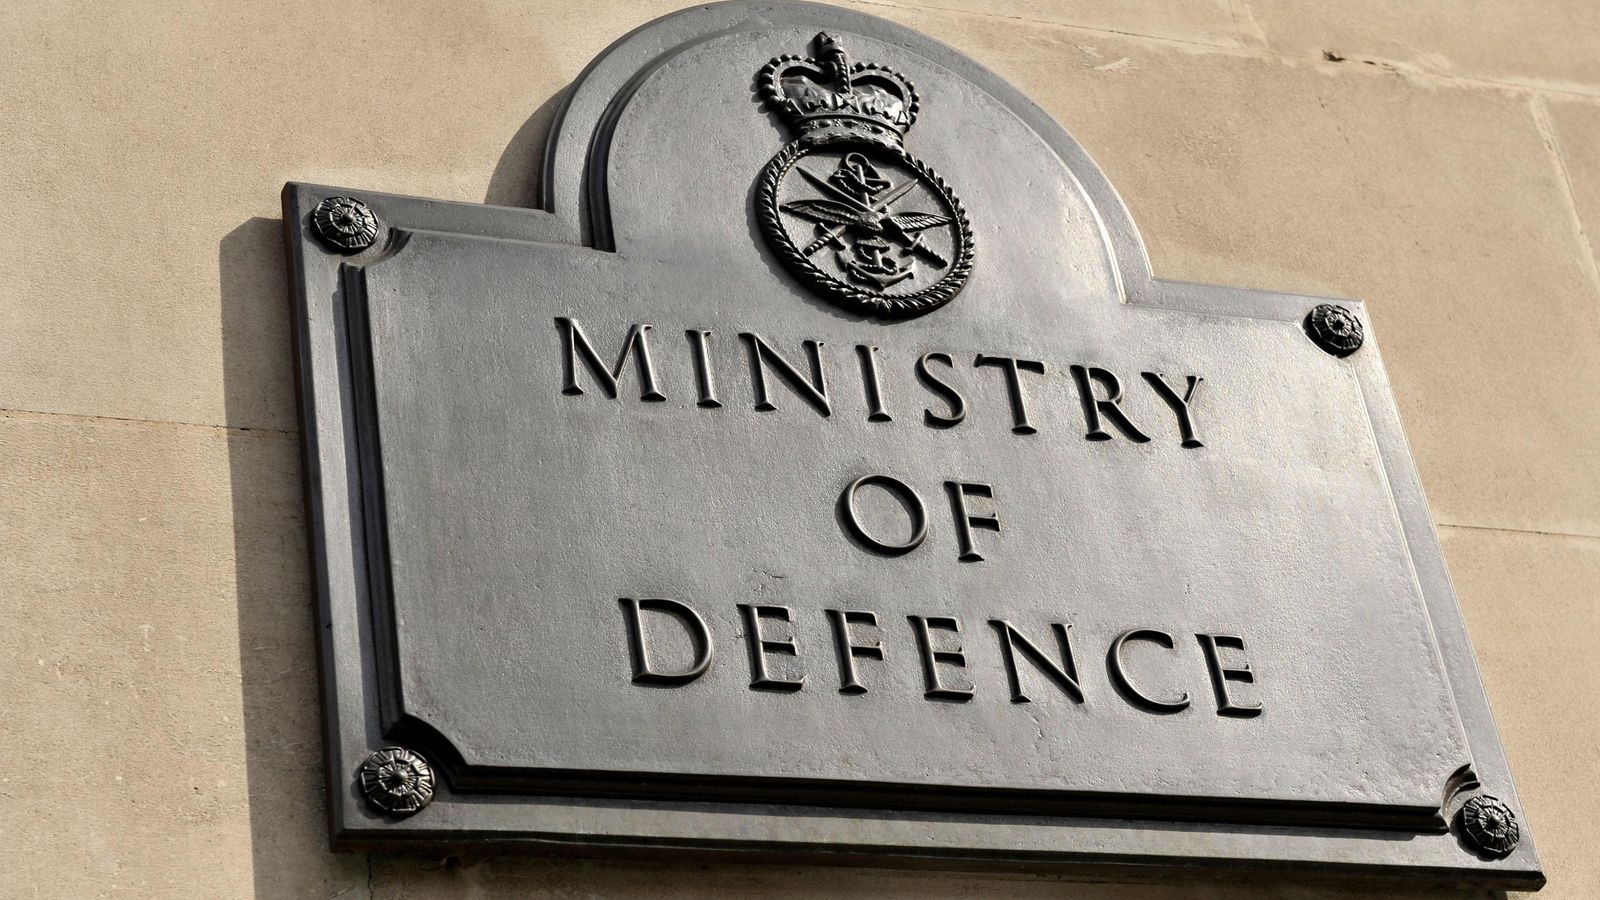 Ministry of Defence annual losses of more than £800m criticised as 'utterly indefensible'